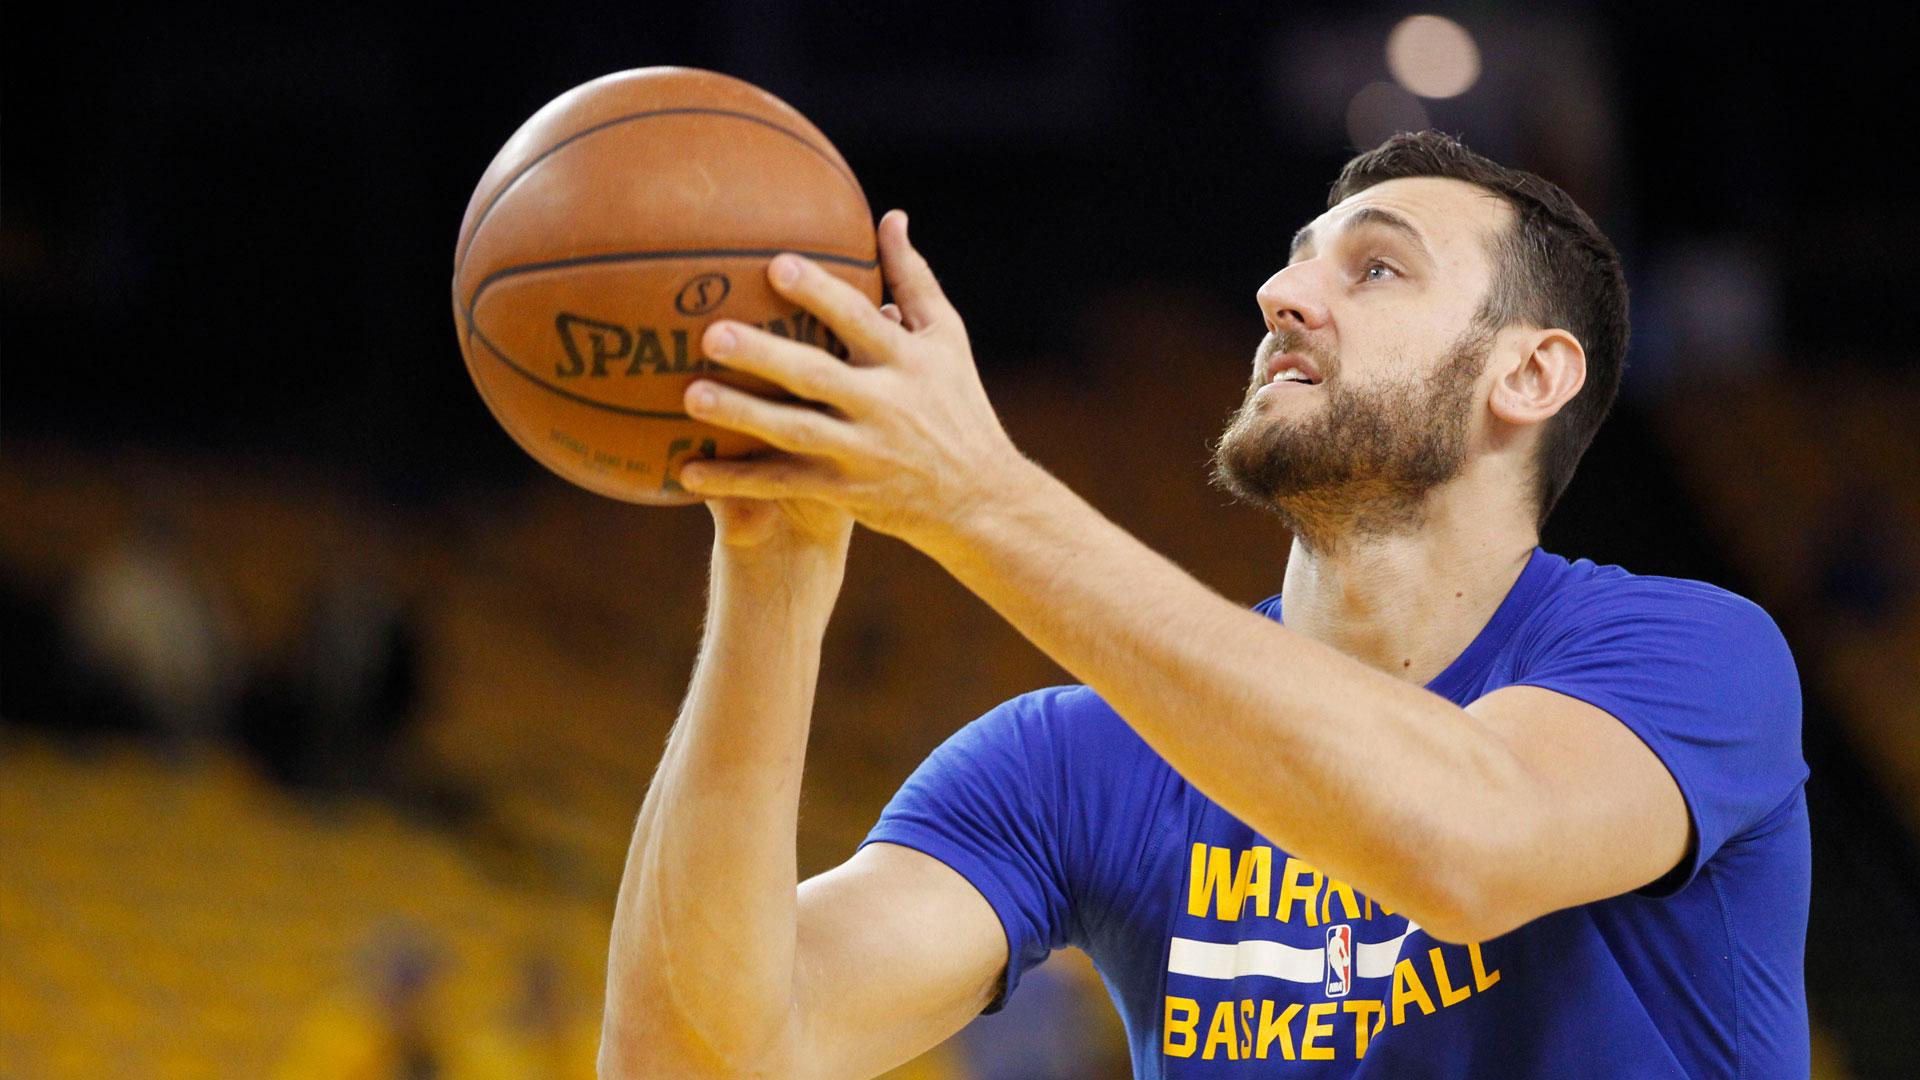 Upon Andrew Bogut's possible Warriors reunion, watch his NBL